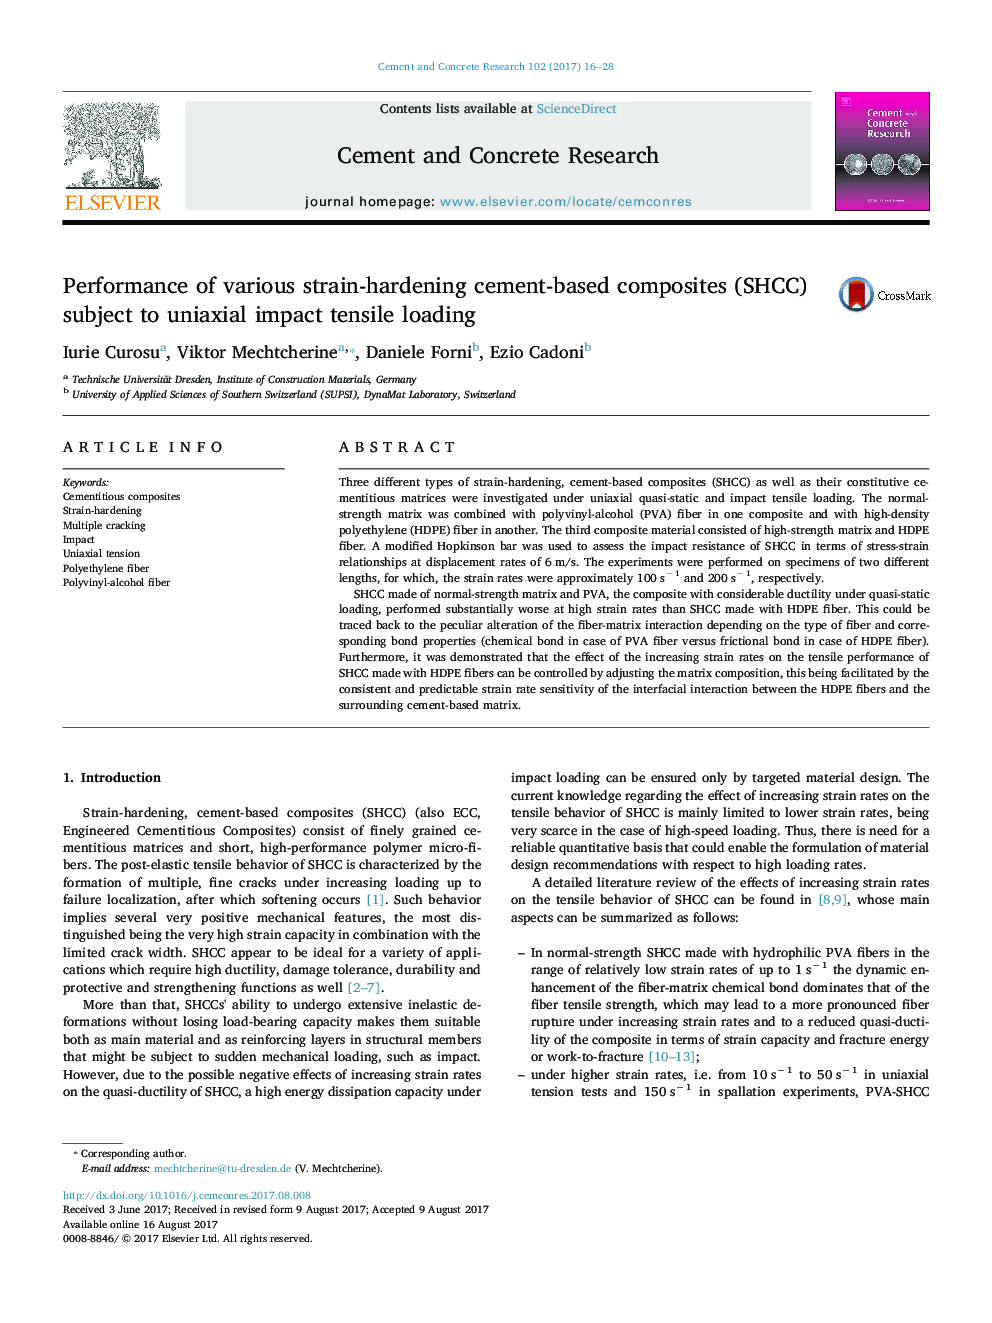 Performance of various strain-hardening cement-based composites (SHCC) subject to uniaxial impact tensile loading